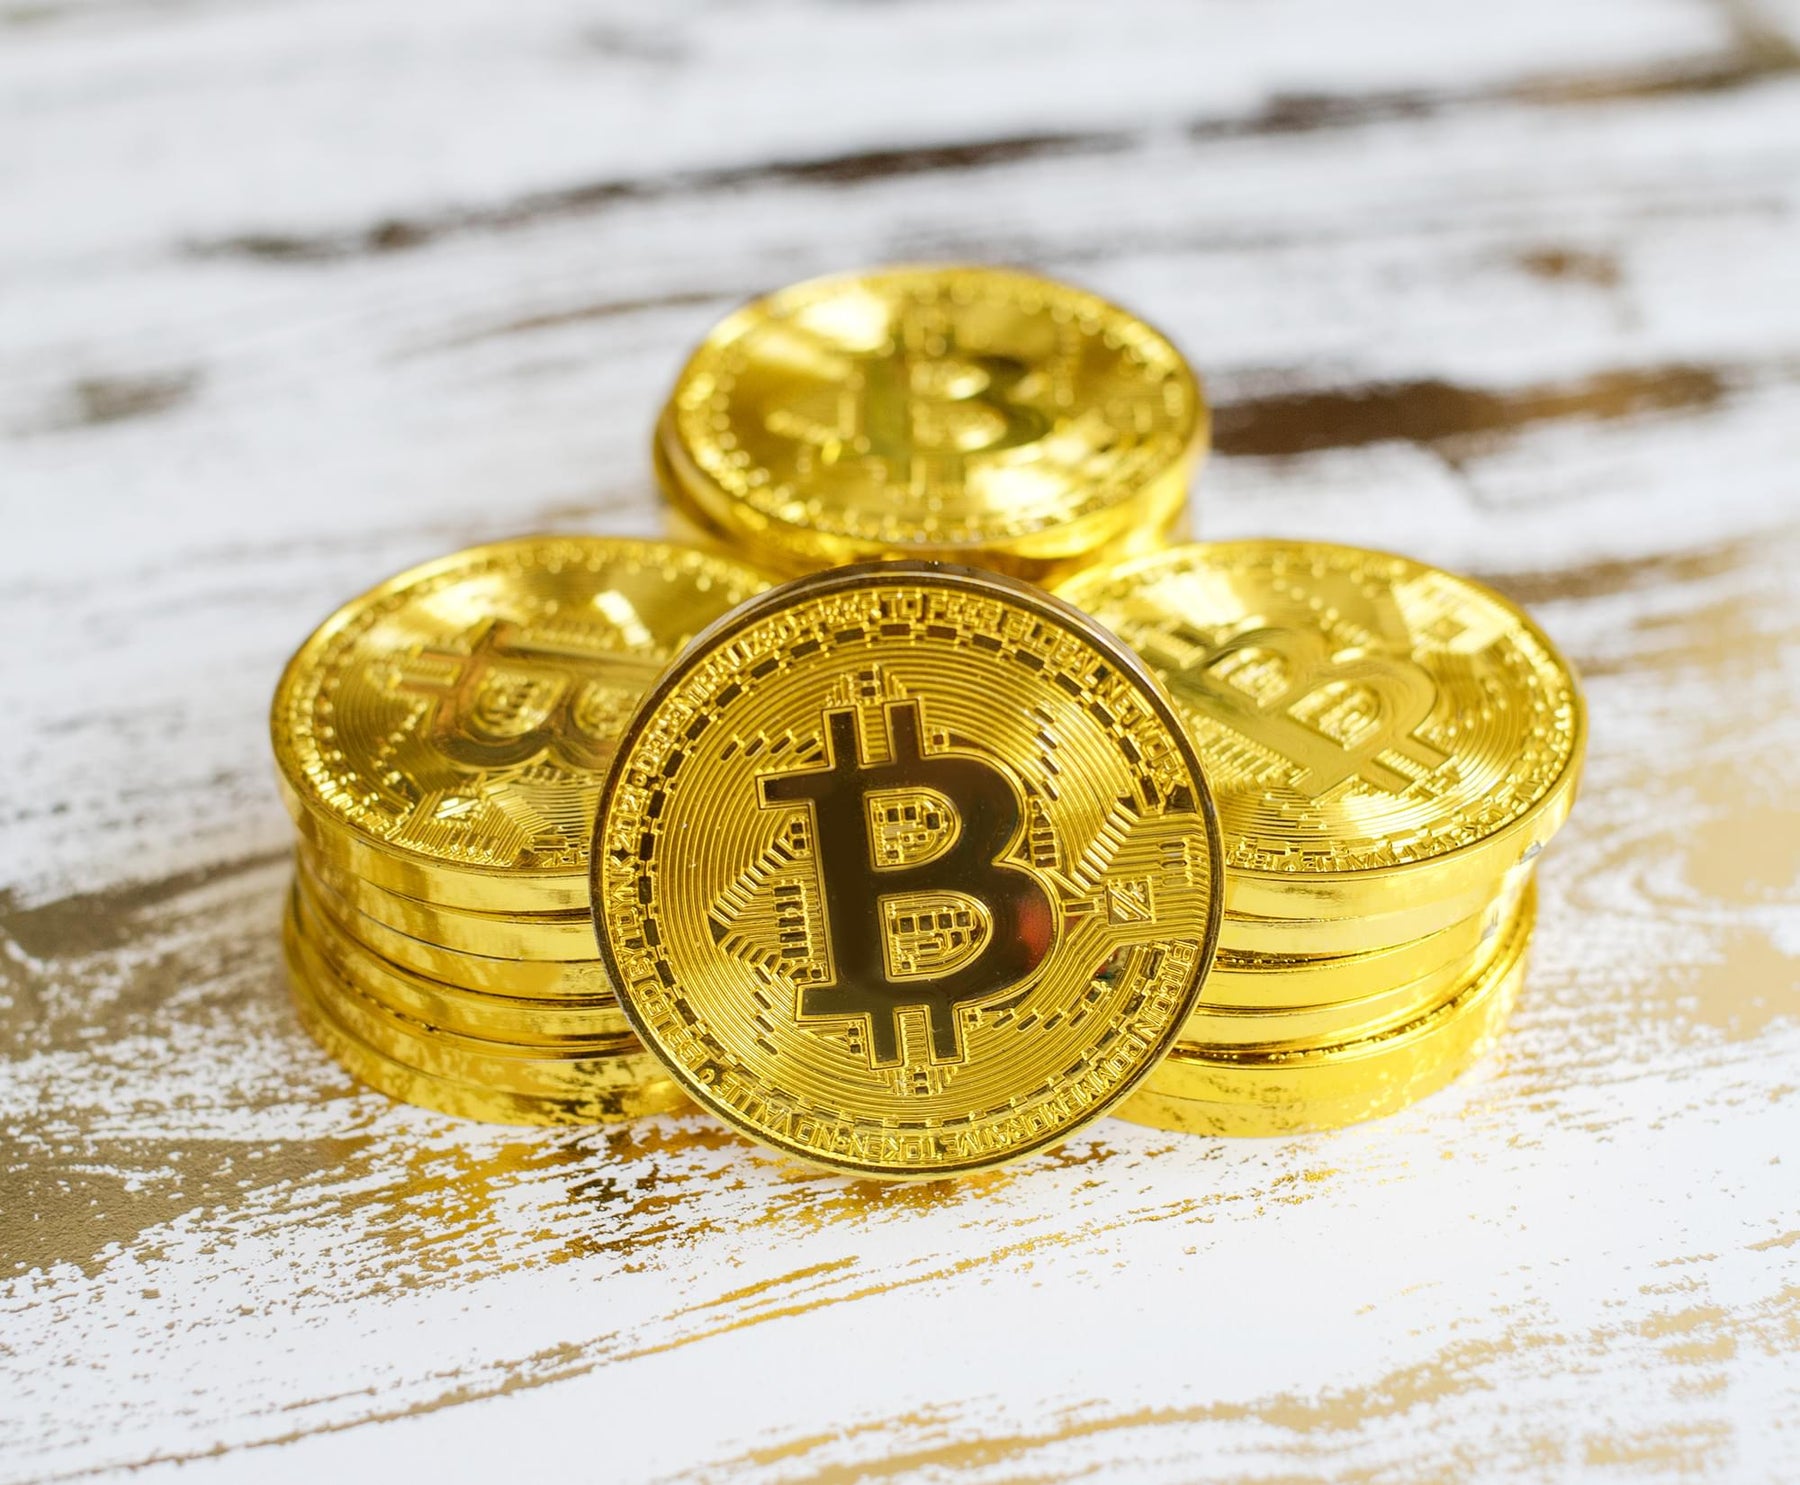 Bag of Bitcoins Cryptocurrency Souvenir Novelty Item | Includes 20 Tokens